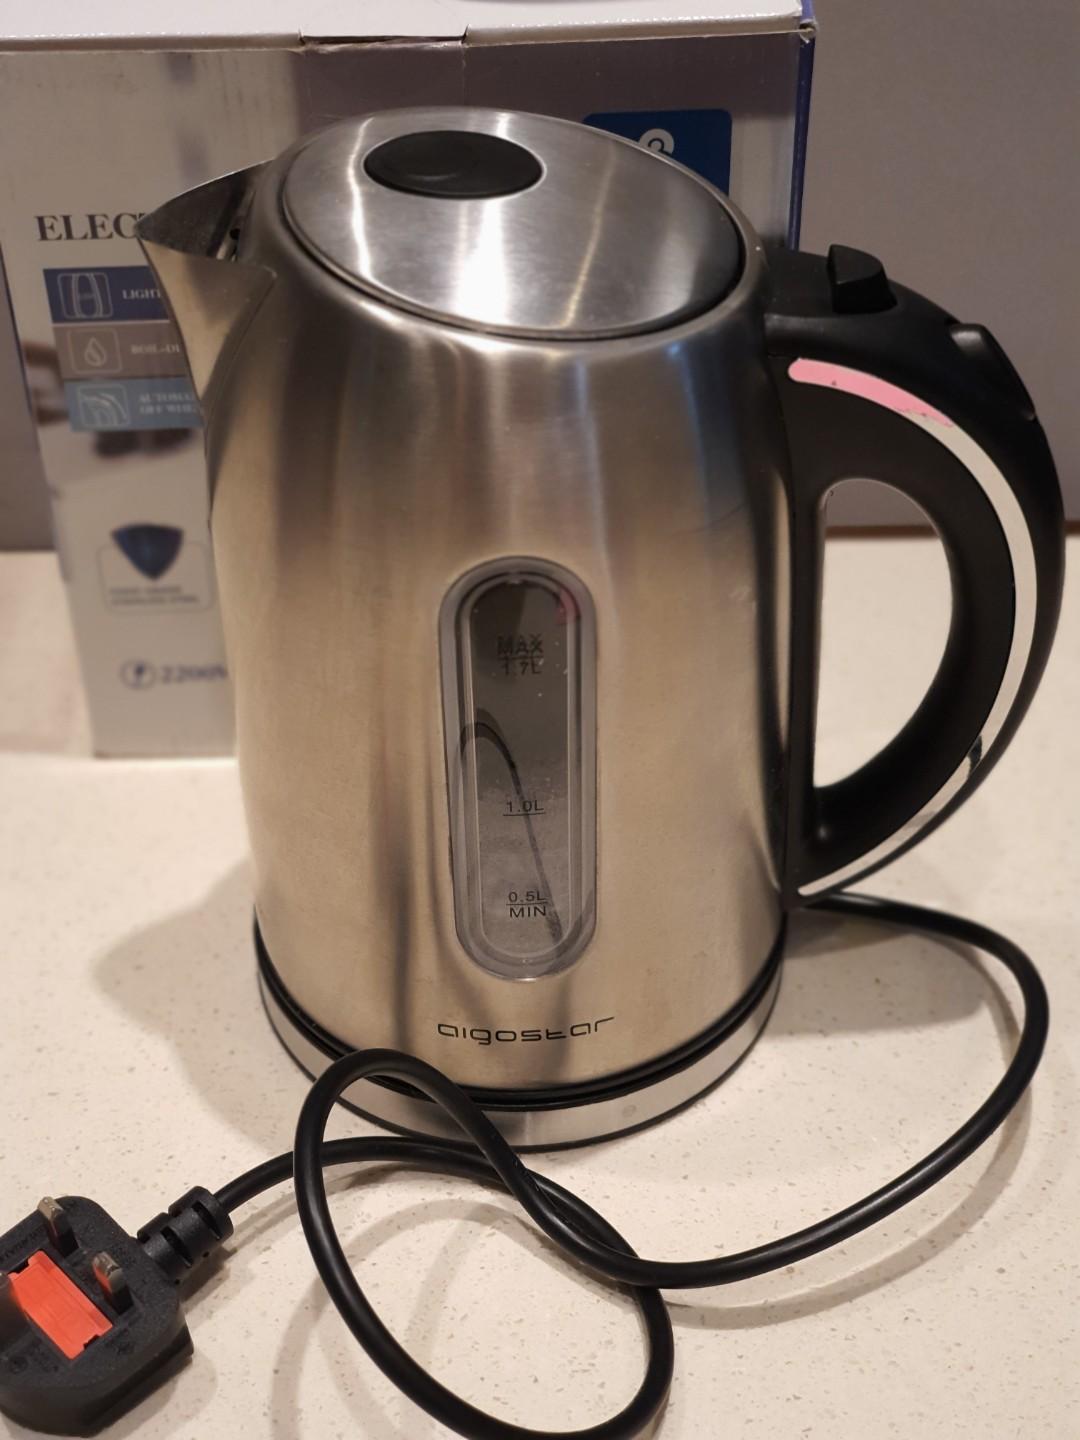 https://media.karousell.com/media/photos/products/2019/09/15/aigostar_king__electric_kettle_17l_stainless_steel_1568553369_4026760a_progressive.jpg